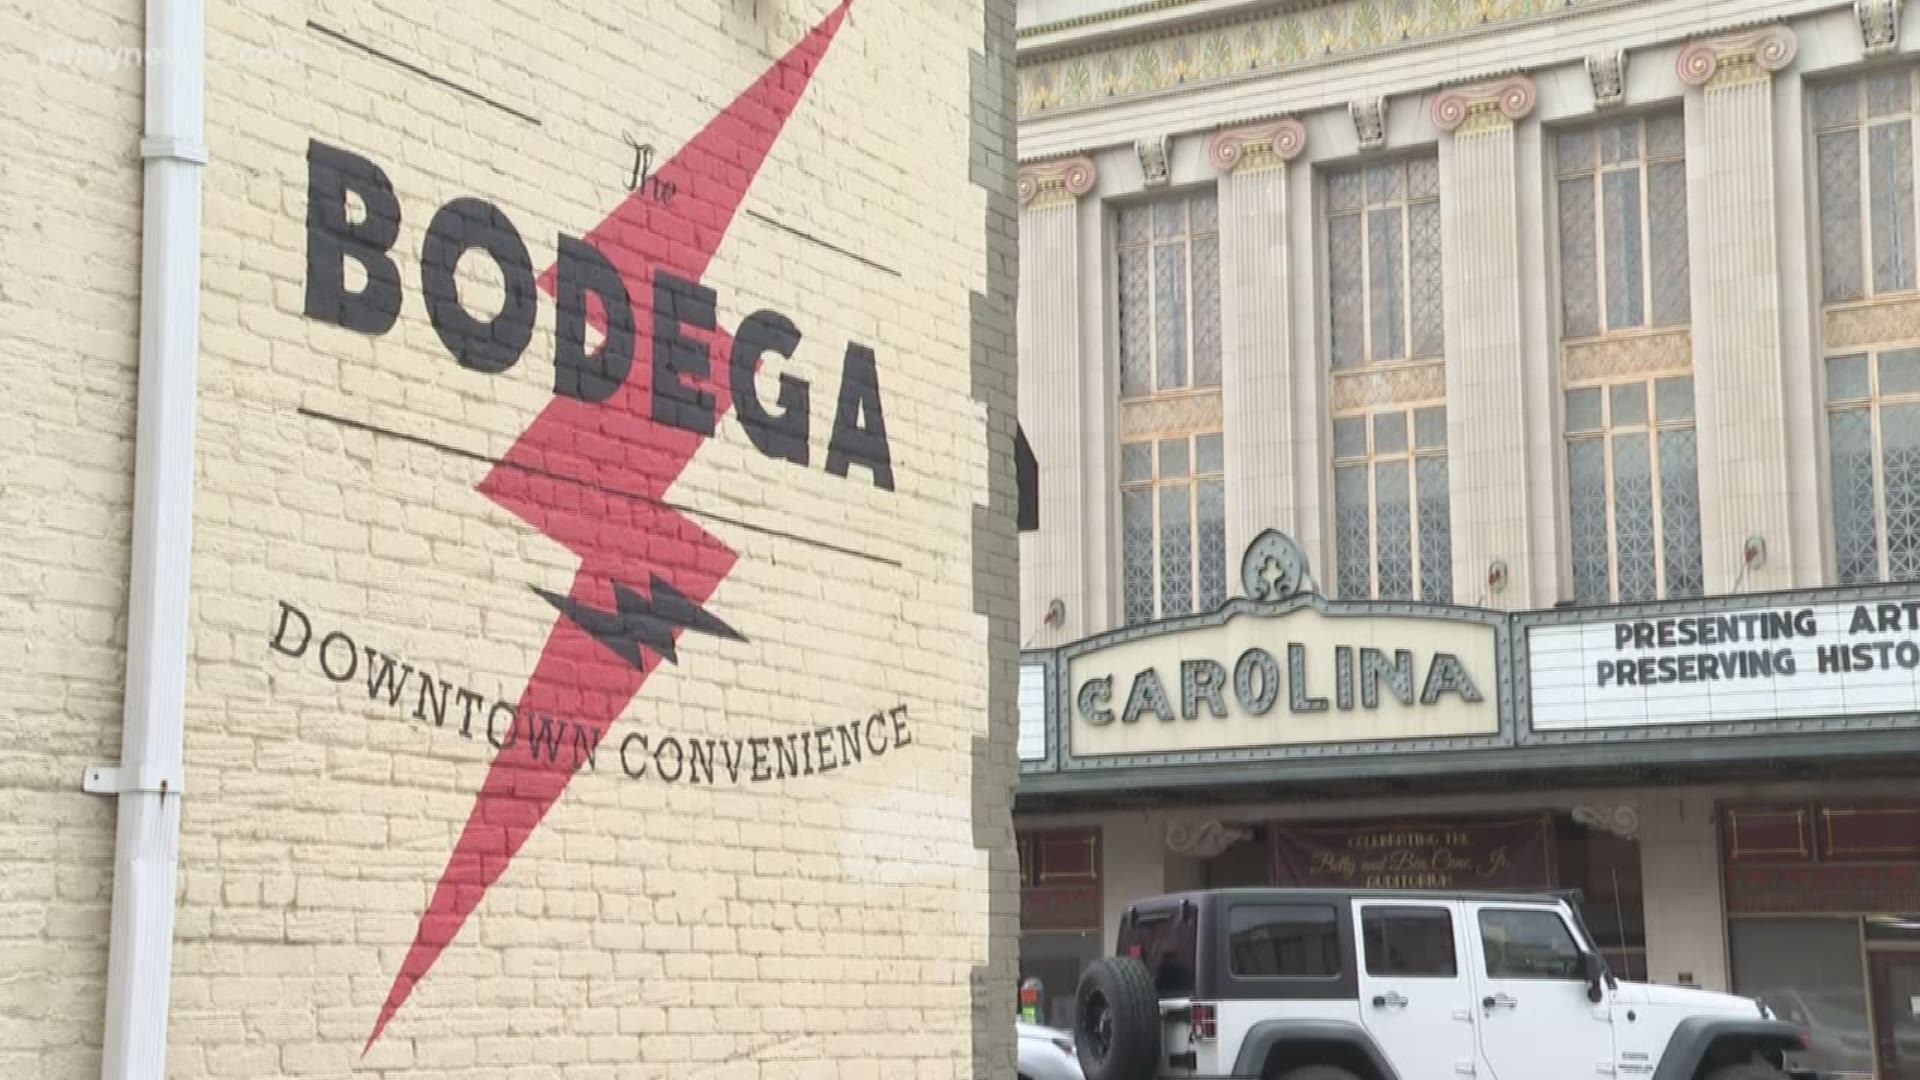 Bodega opens its doors in downtown Greensboro to give residents a closer option for groceries.